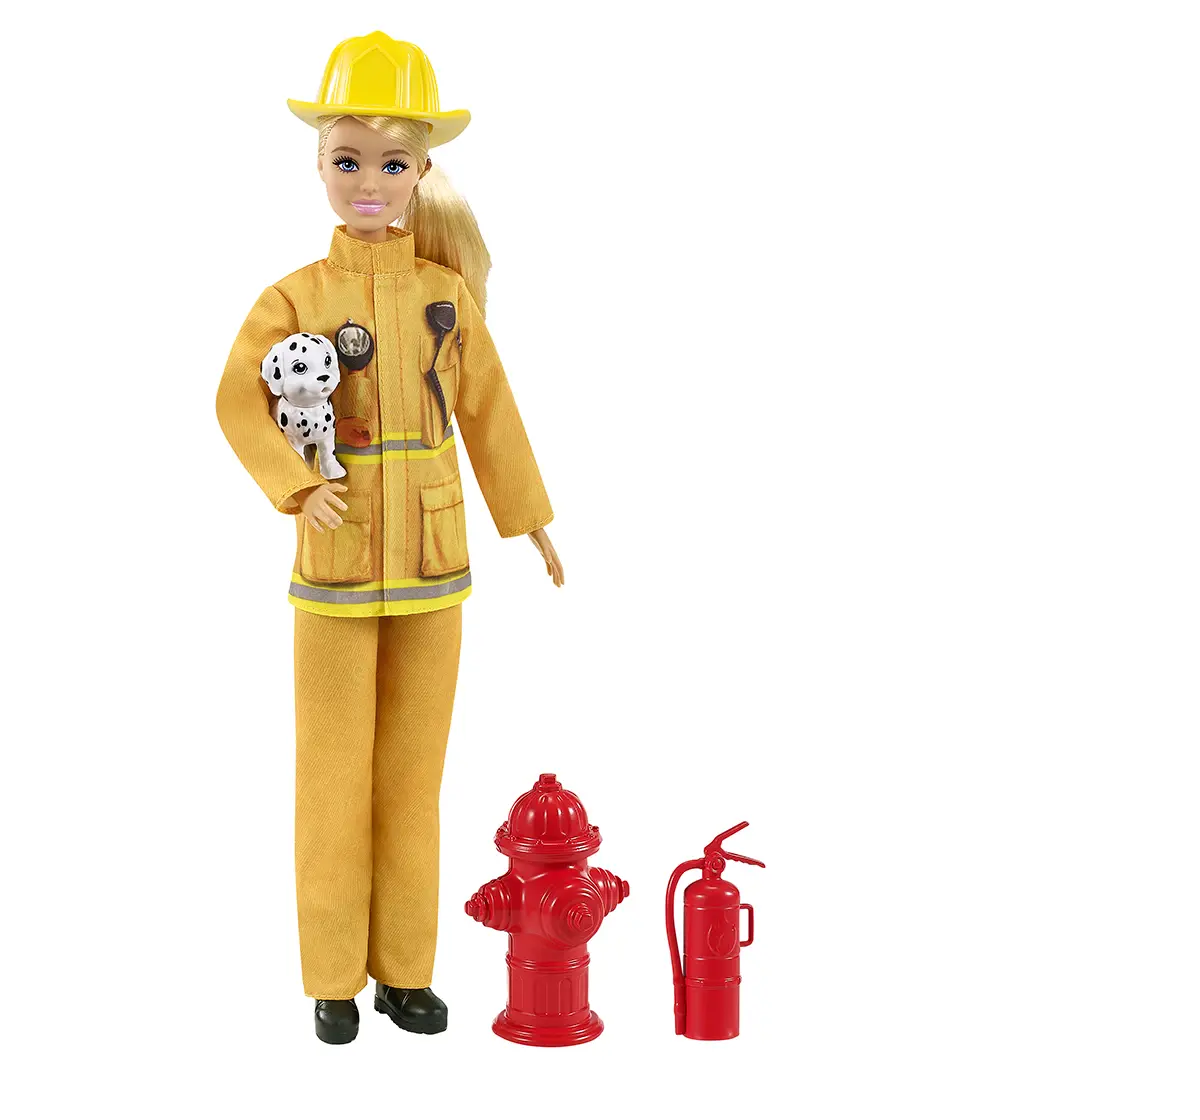 Barbie Chelsea Can Be Playset with Firefighter Play Doll, Kids for 3Y+, Multicolour